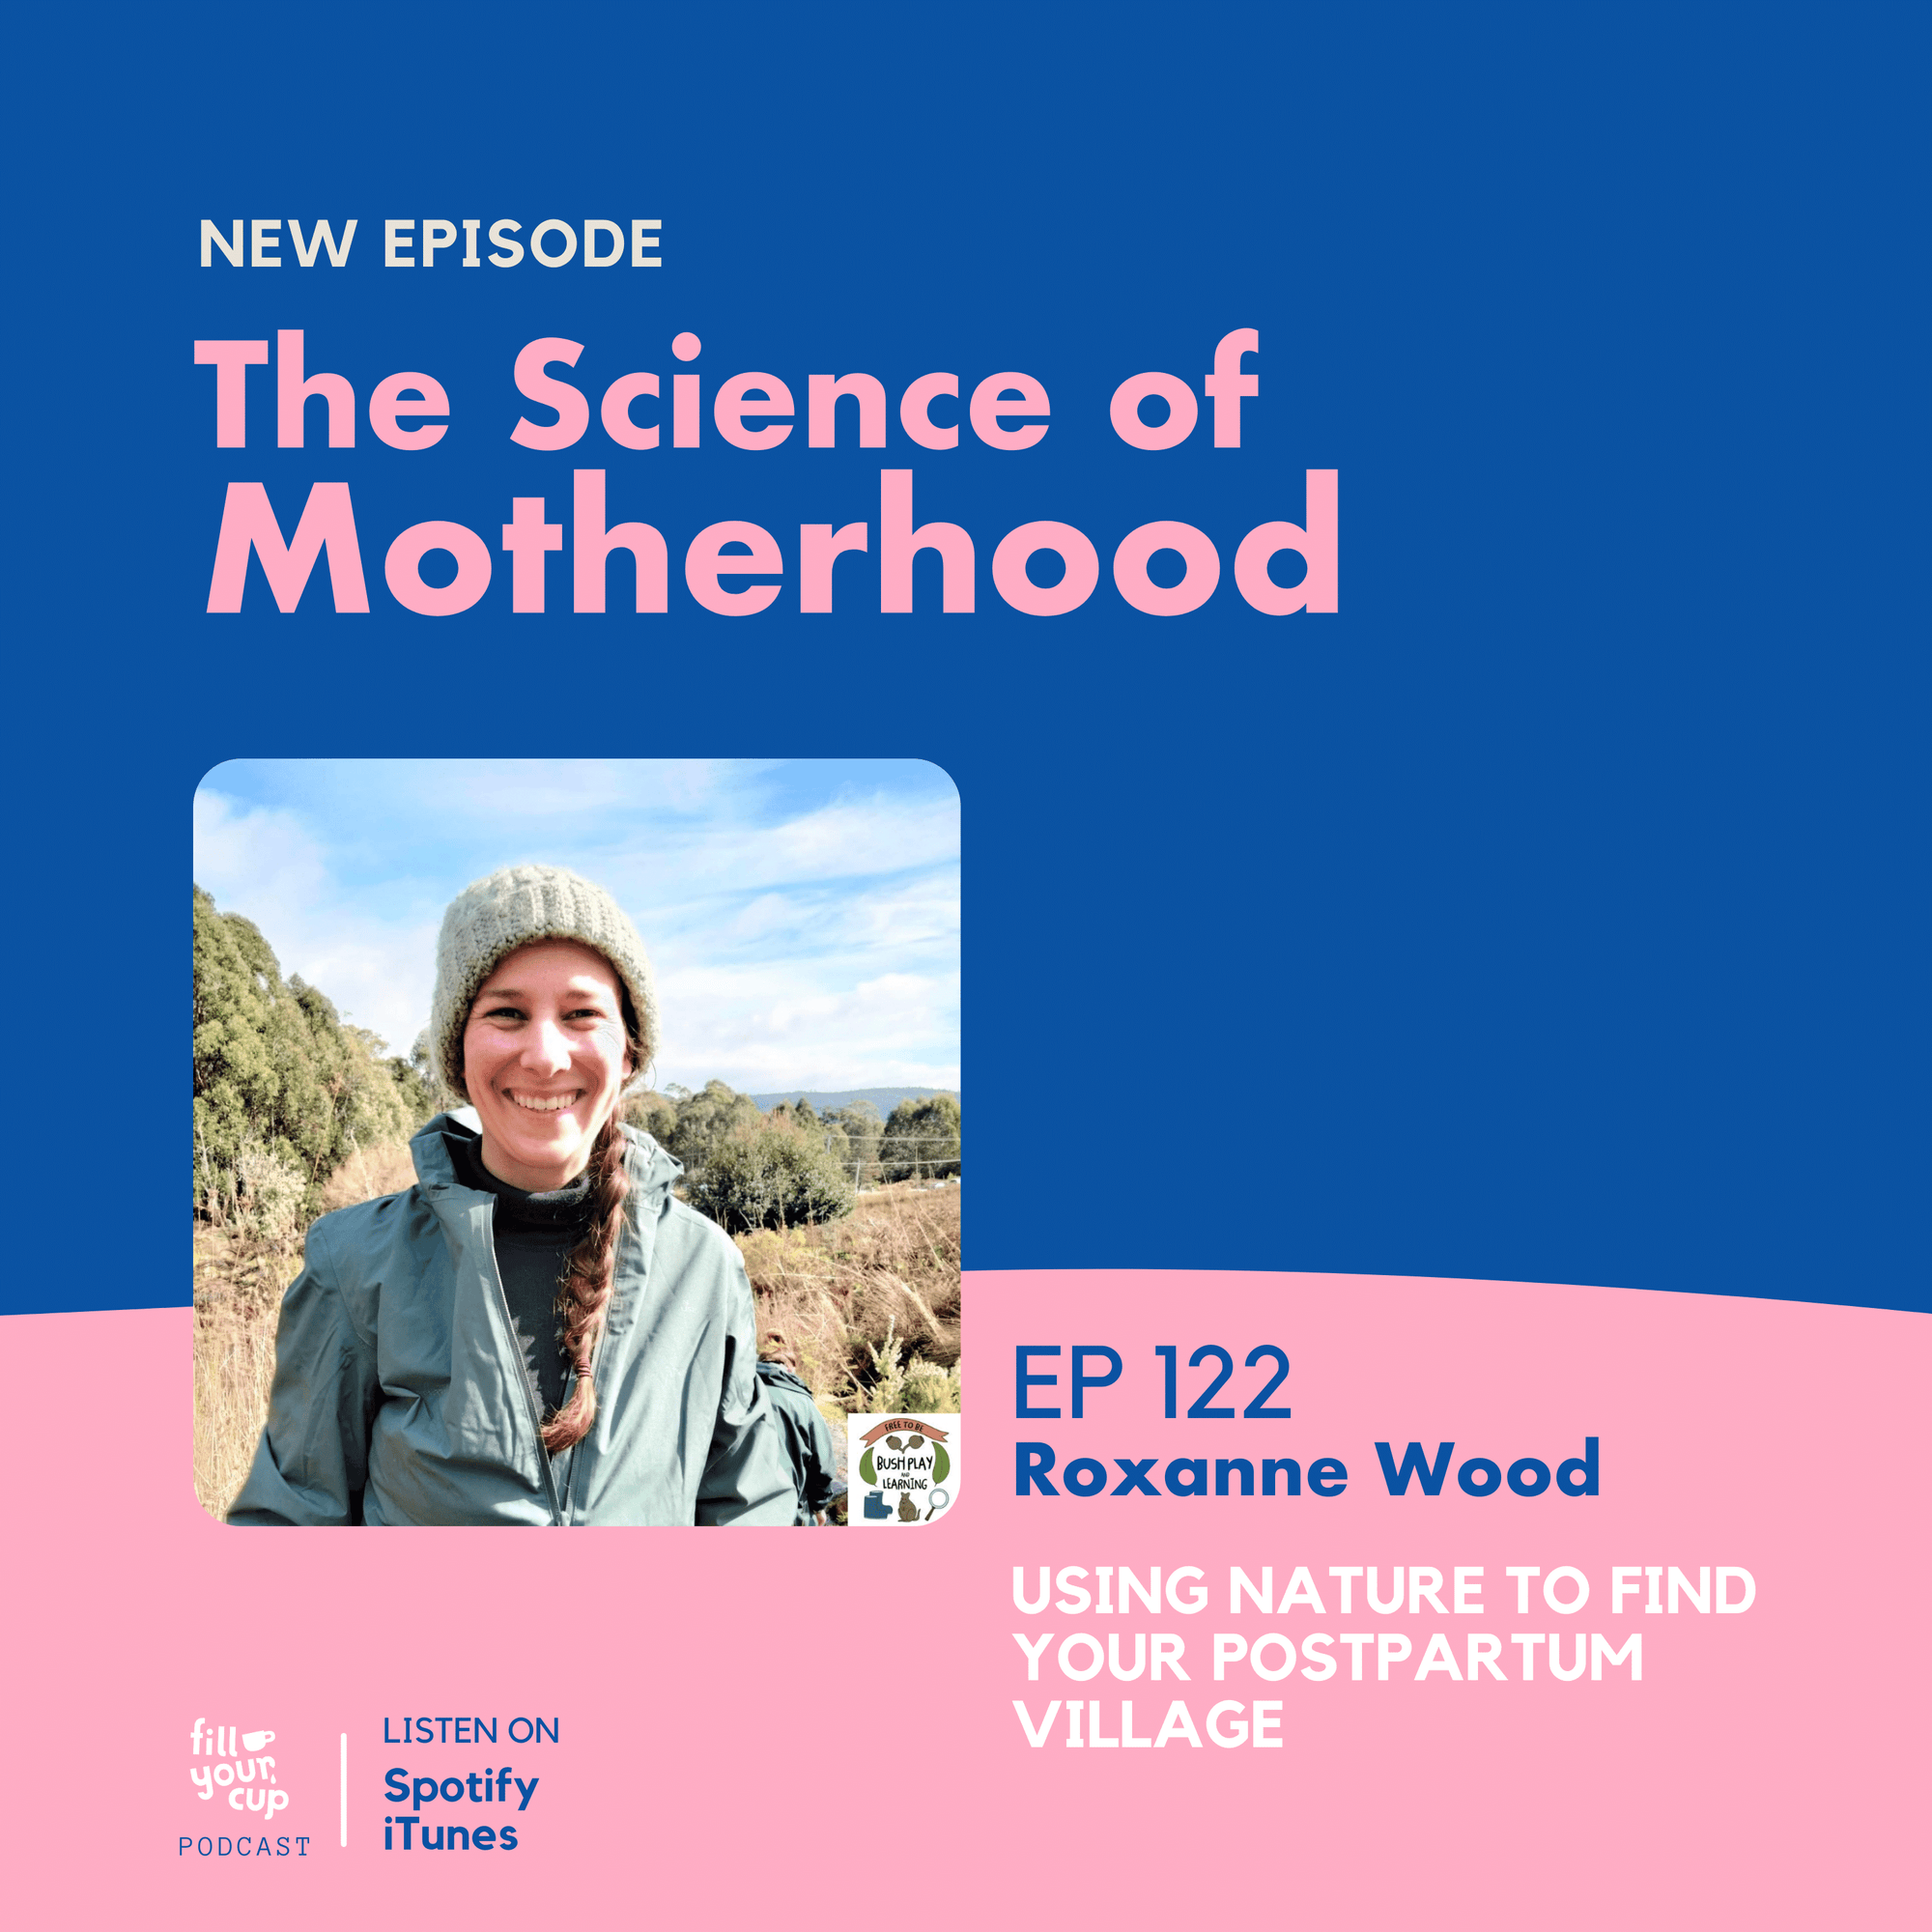 Ep 122. Roxanne Wood - Using Nature to Find Your Postpartum Village